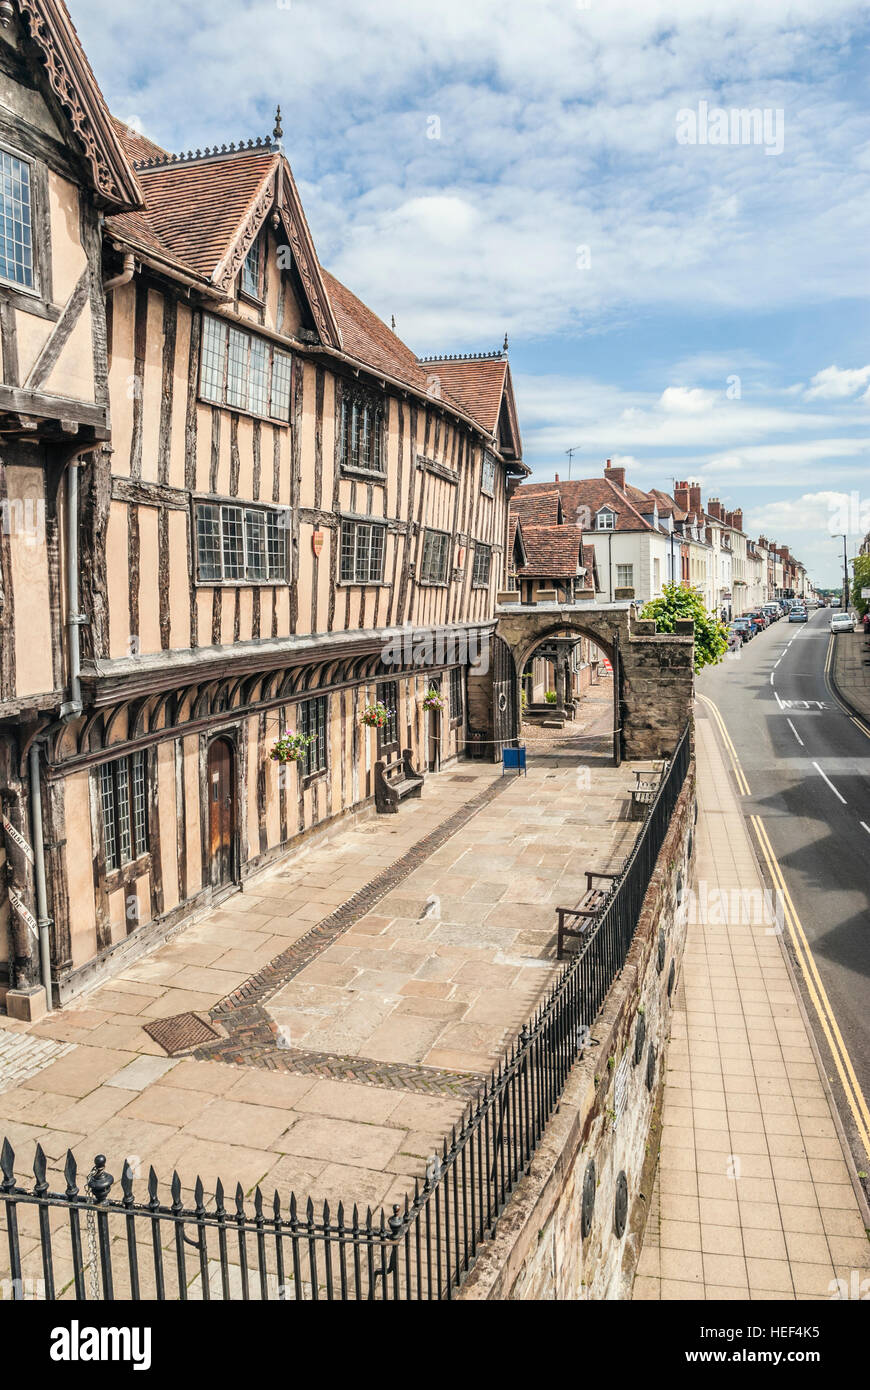 Lord Leycester Hospital in Warwick a medieval county town of Warwickshire, England. Stock Photo